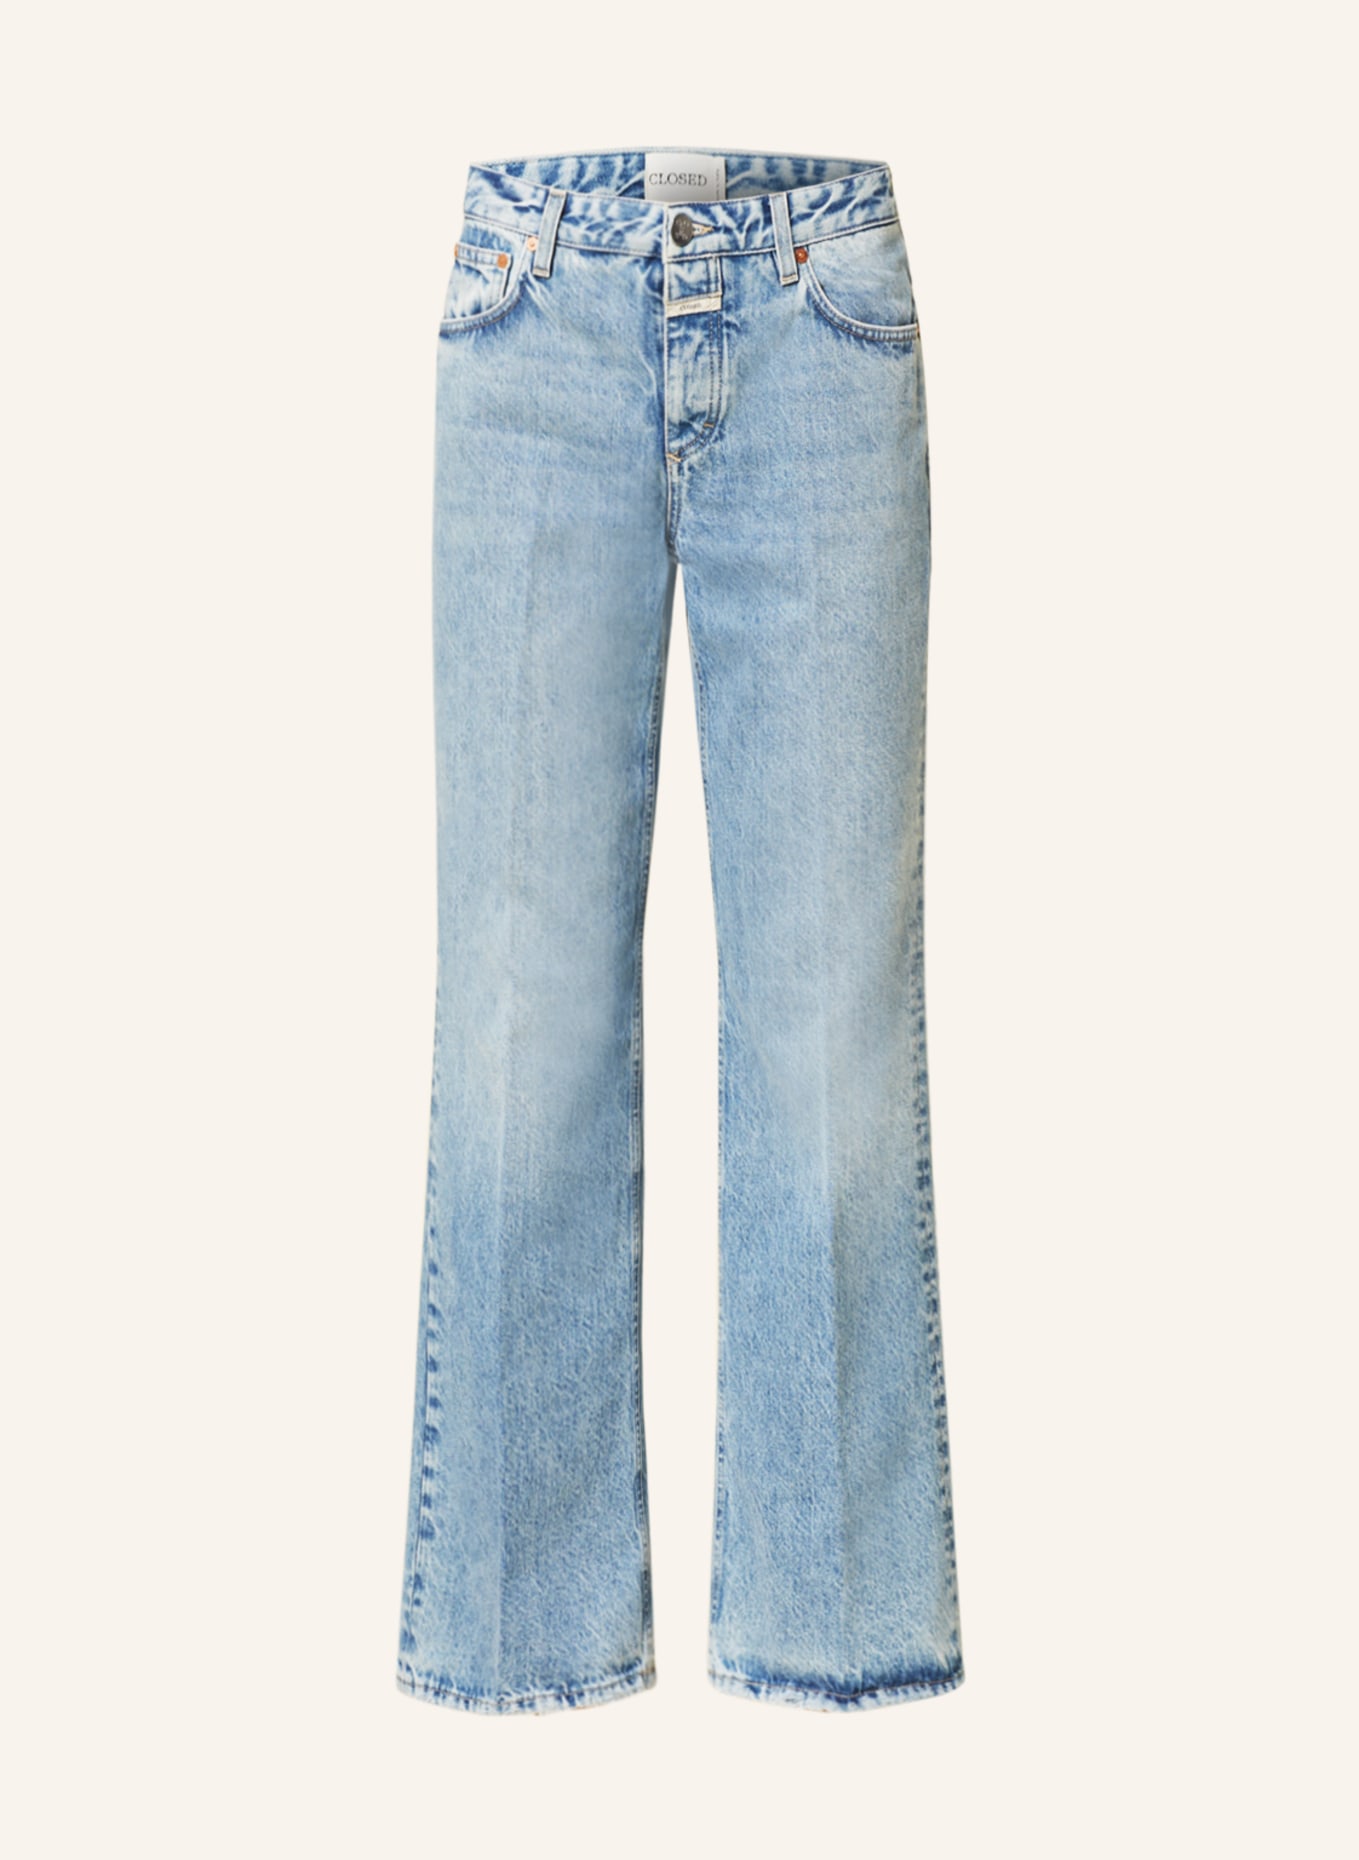 CLOSED Flared Jeans GILLAN CROPPED, Farbe: MBL MID BLUE (Bild 1)